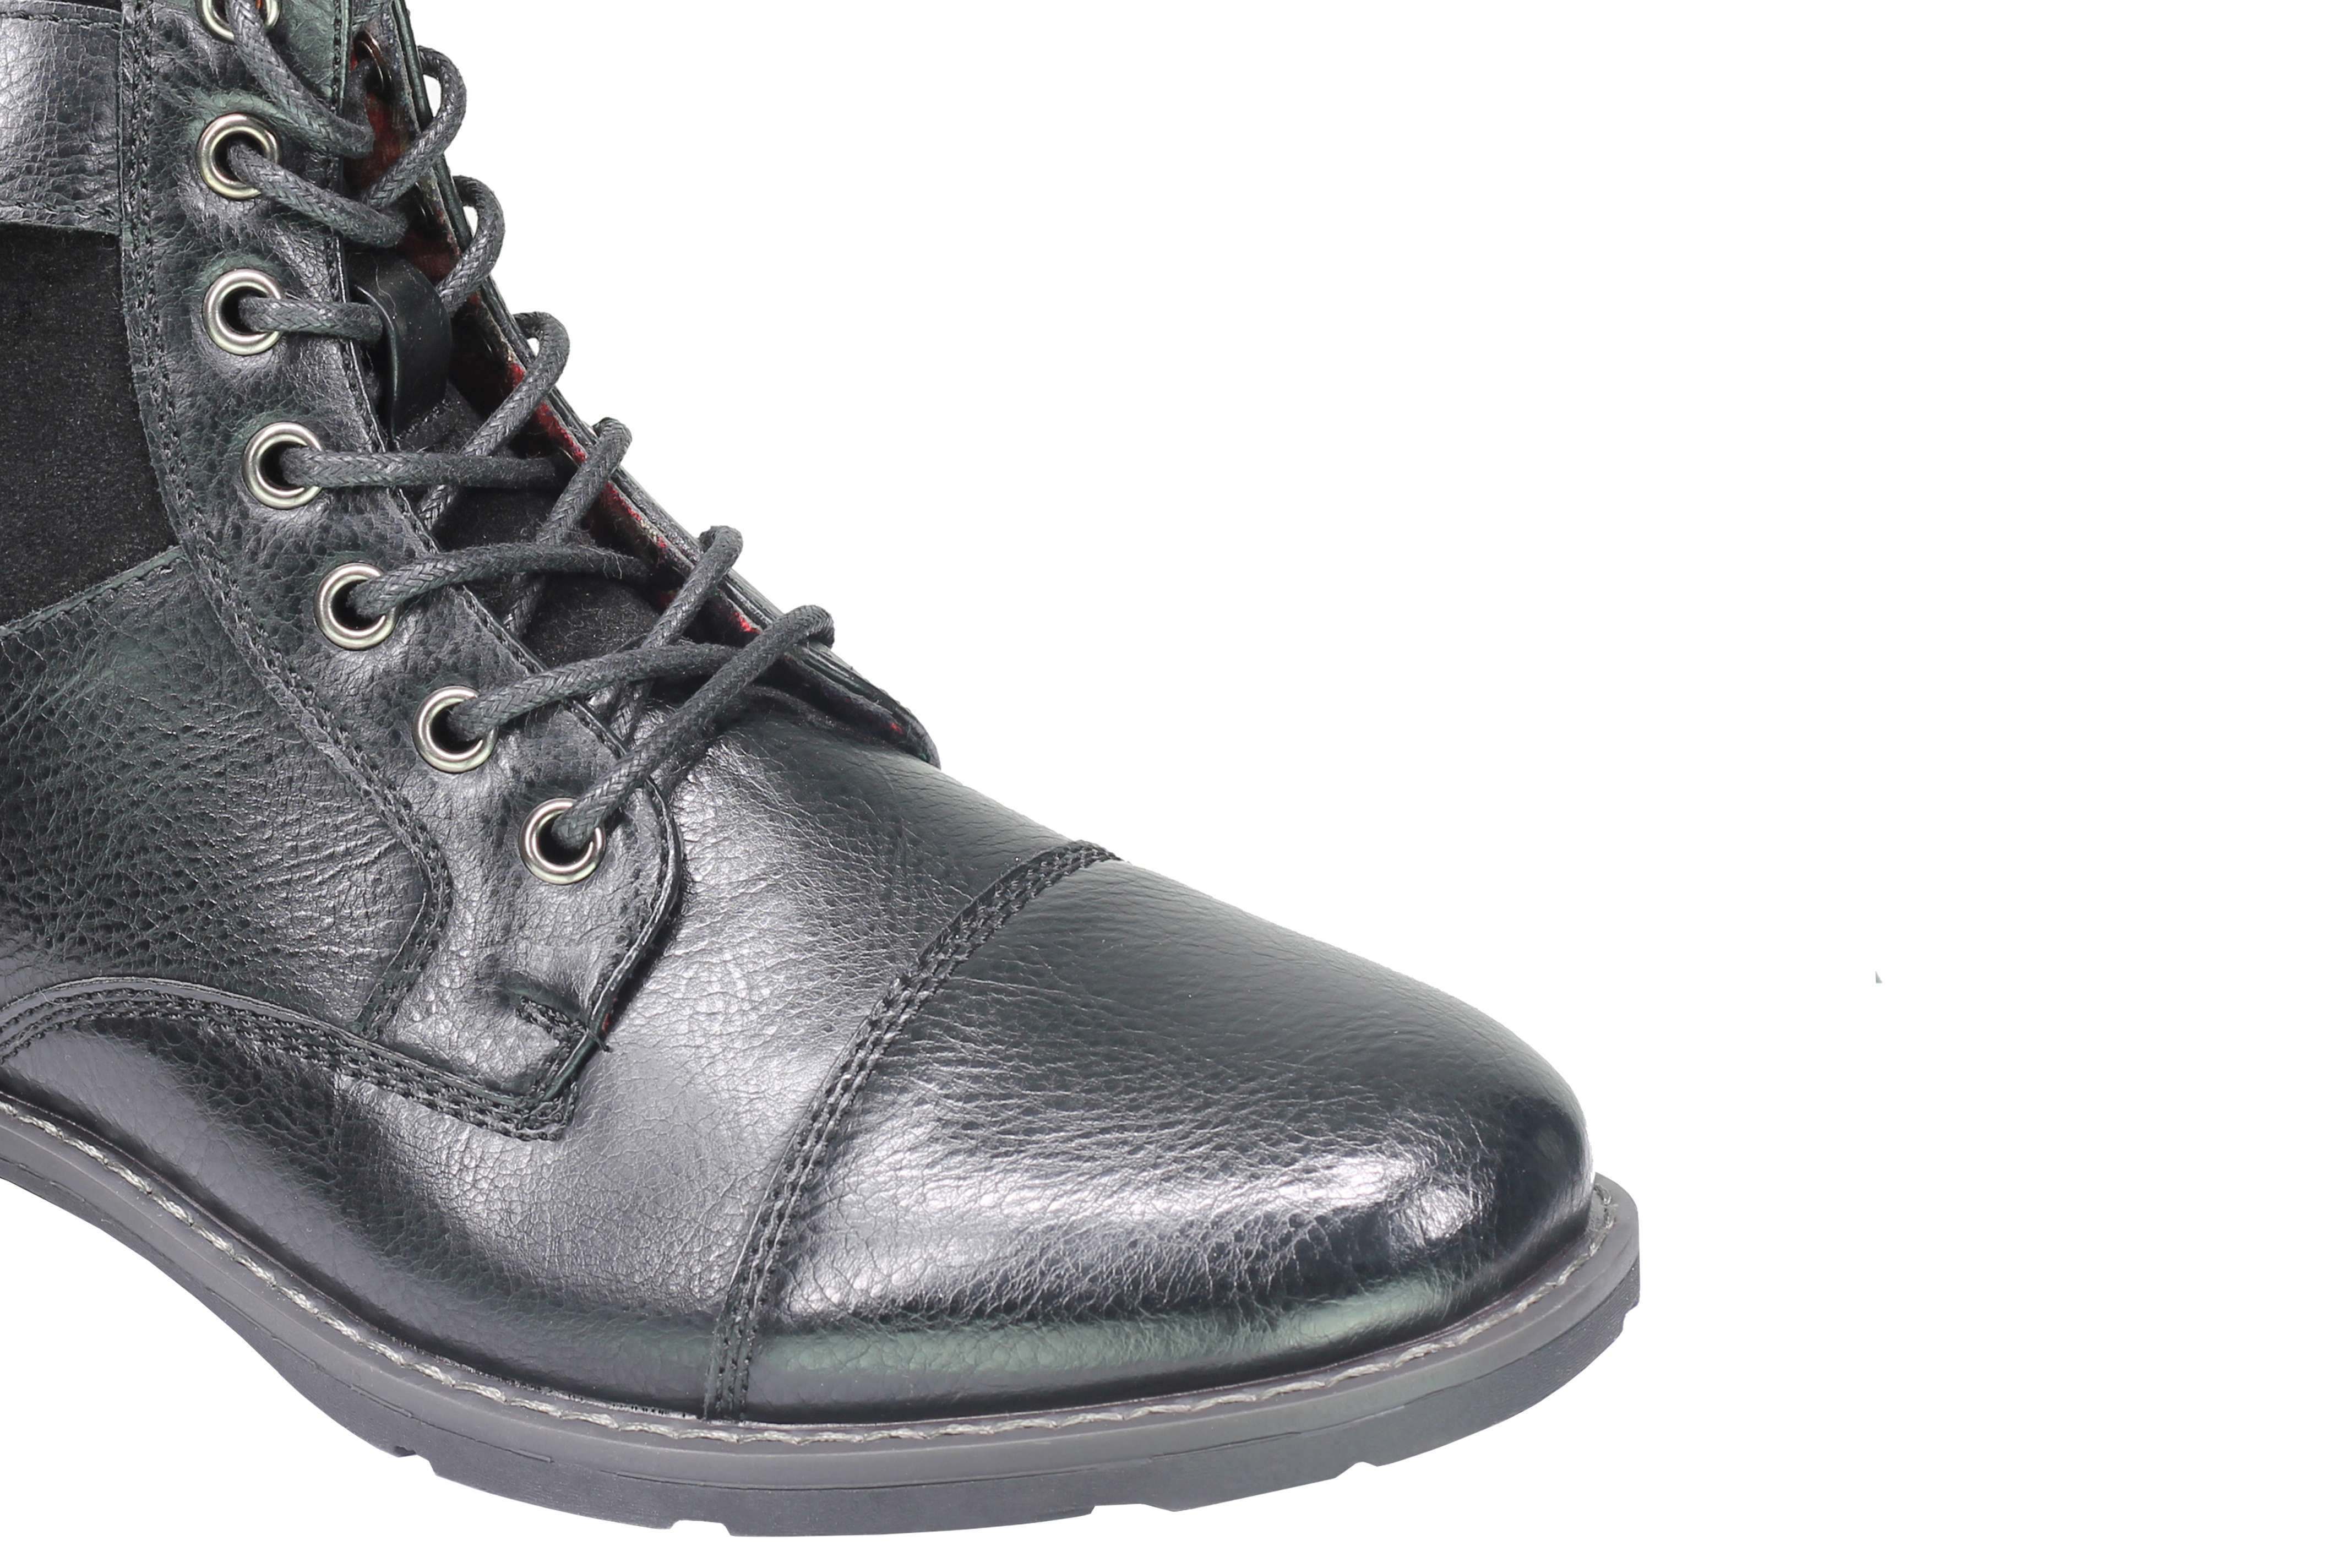 Military Combat Lace Up Boots With Zip